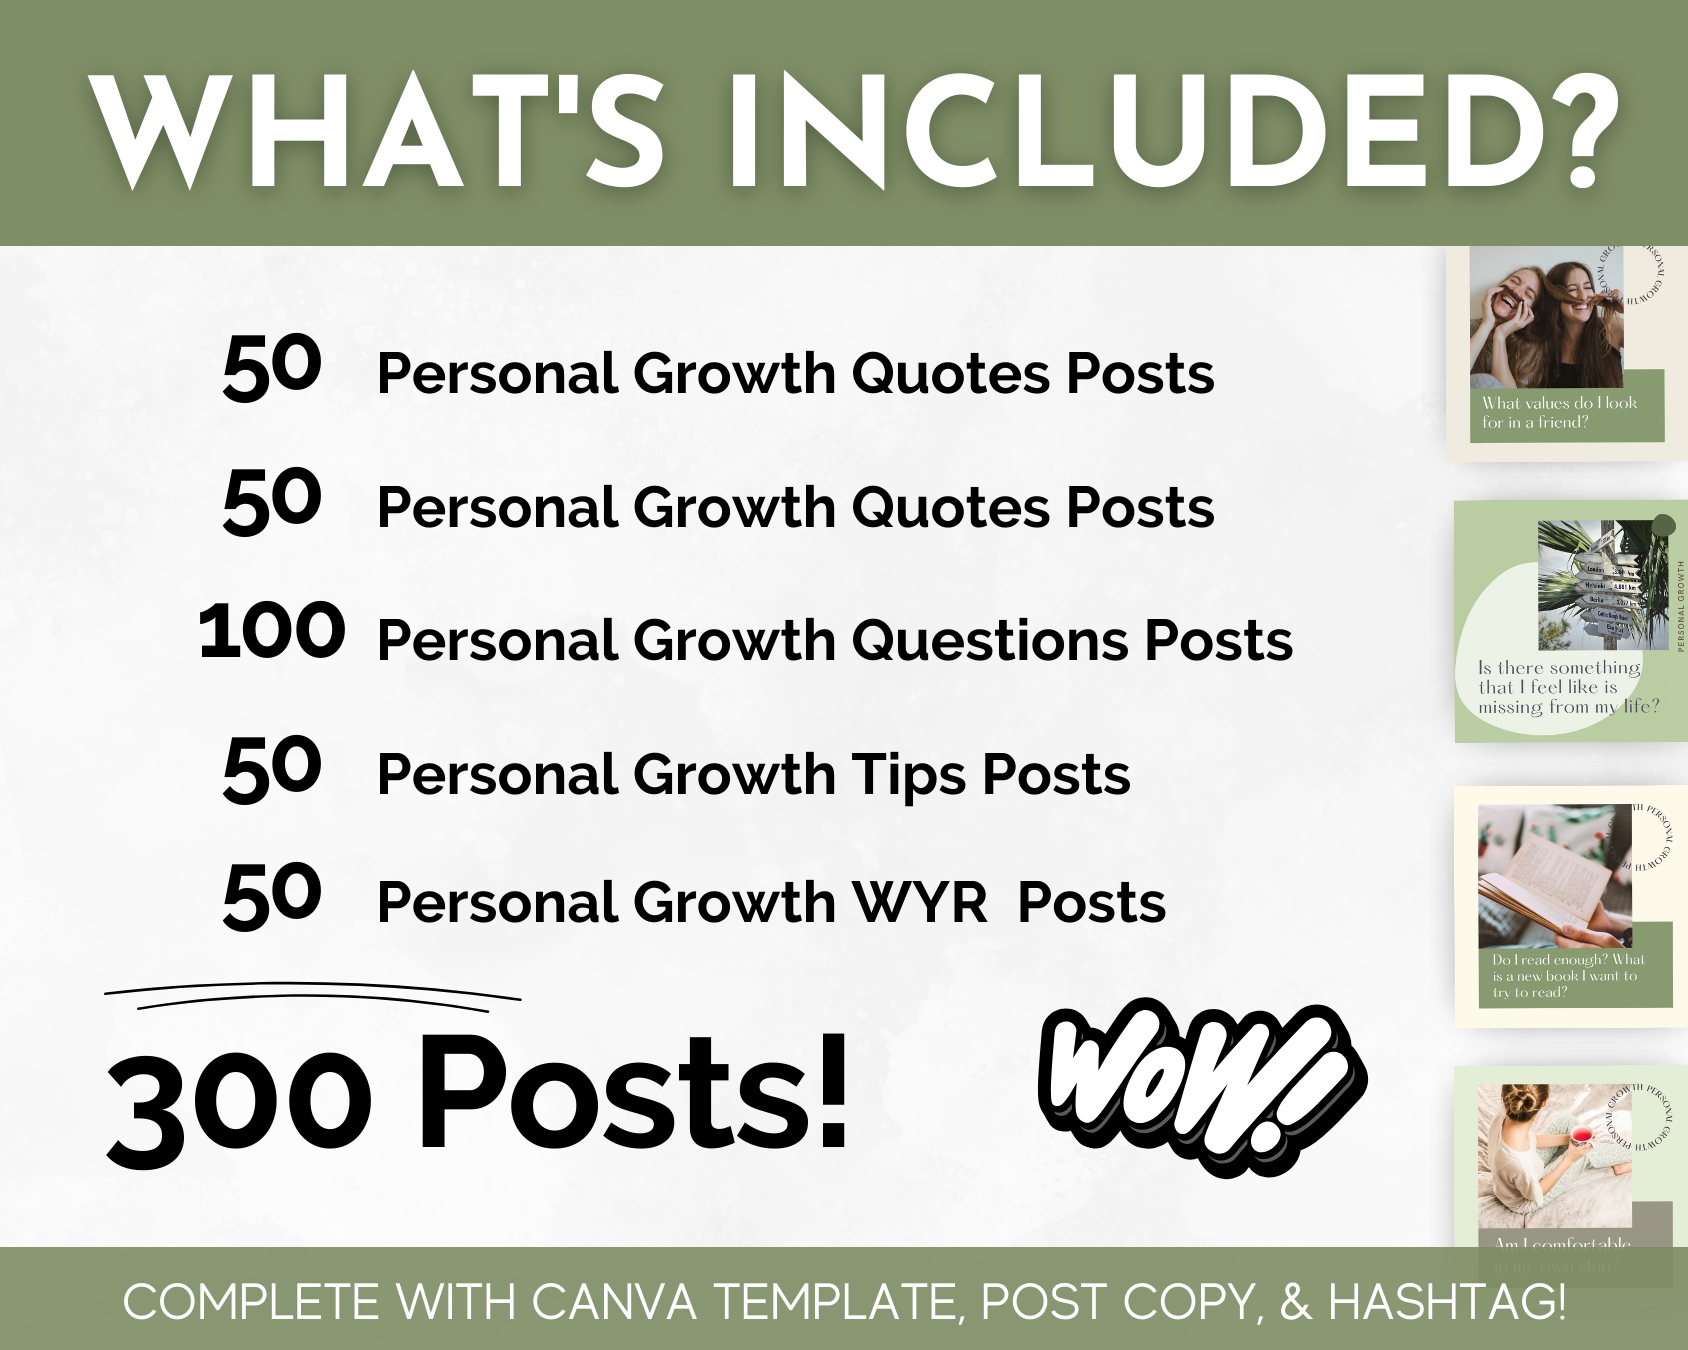 What's included in the transformative Socially Inclined Personal Growth Social Media Post Bundle with Canva Templates featuring personal growth templates?